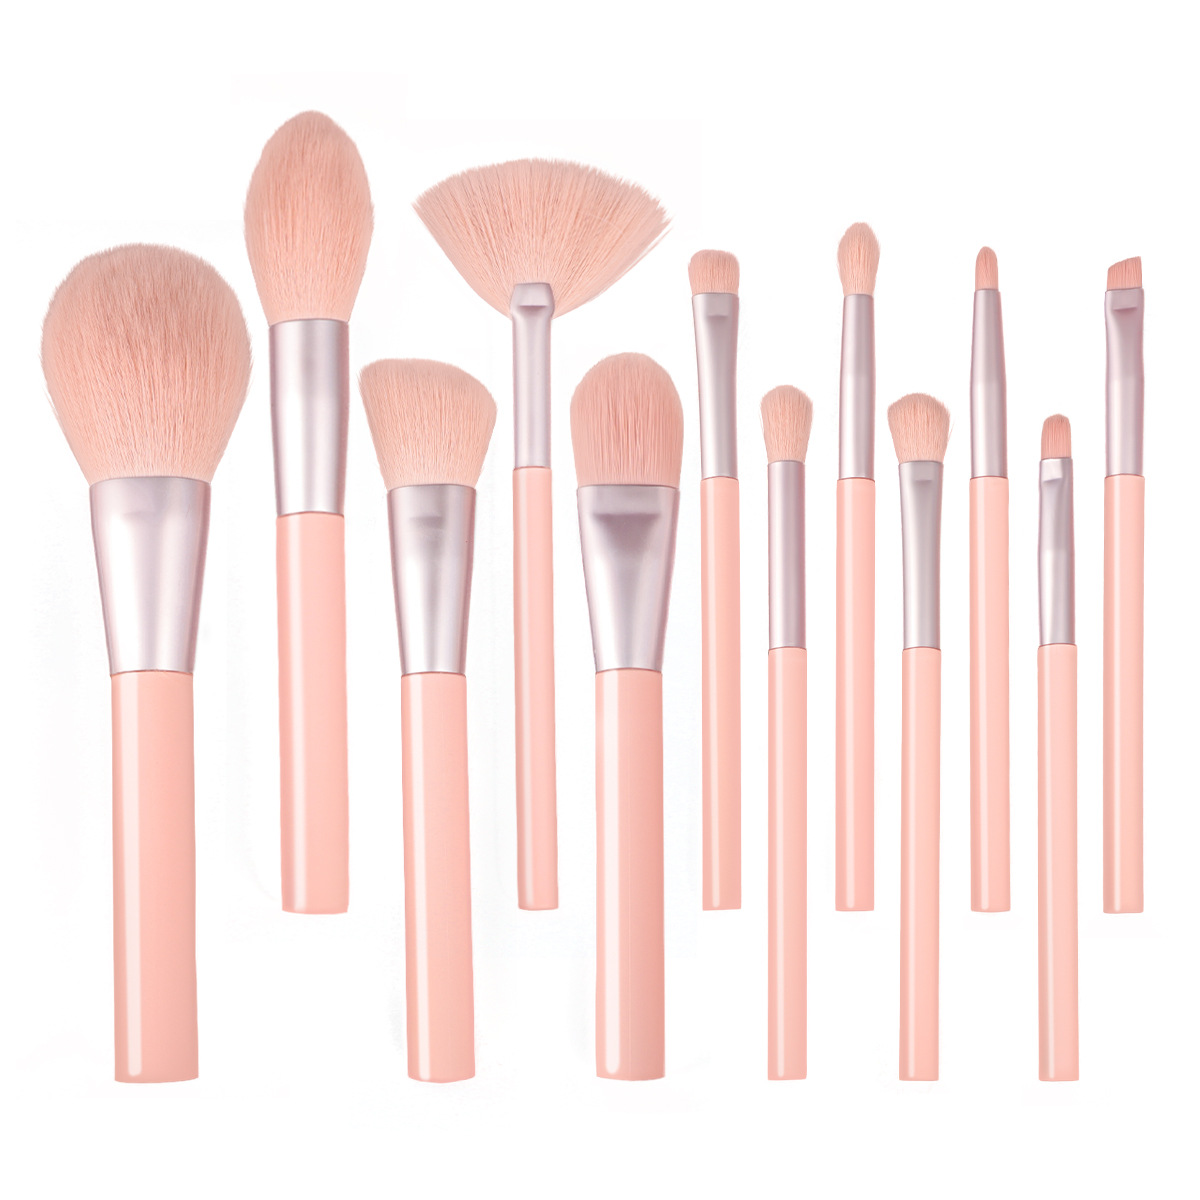 New Private Label 12Pcs Pink Makeup Brush Set Premium Soft Synthetic Hair Makeup Tools for Foundation Concealer Eyeshadow